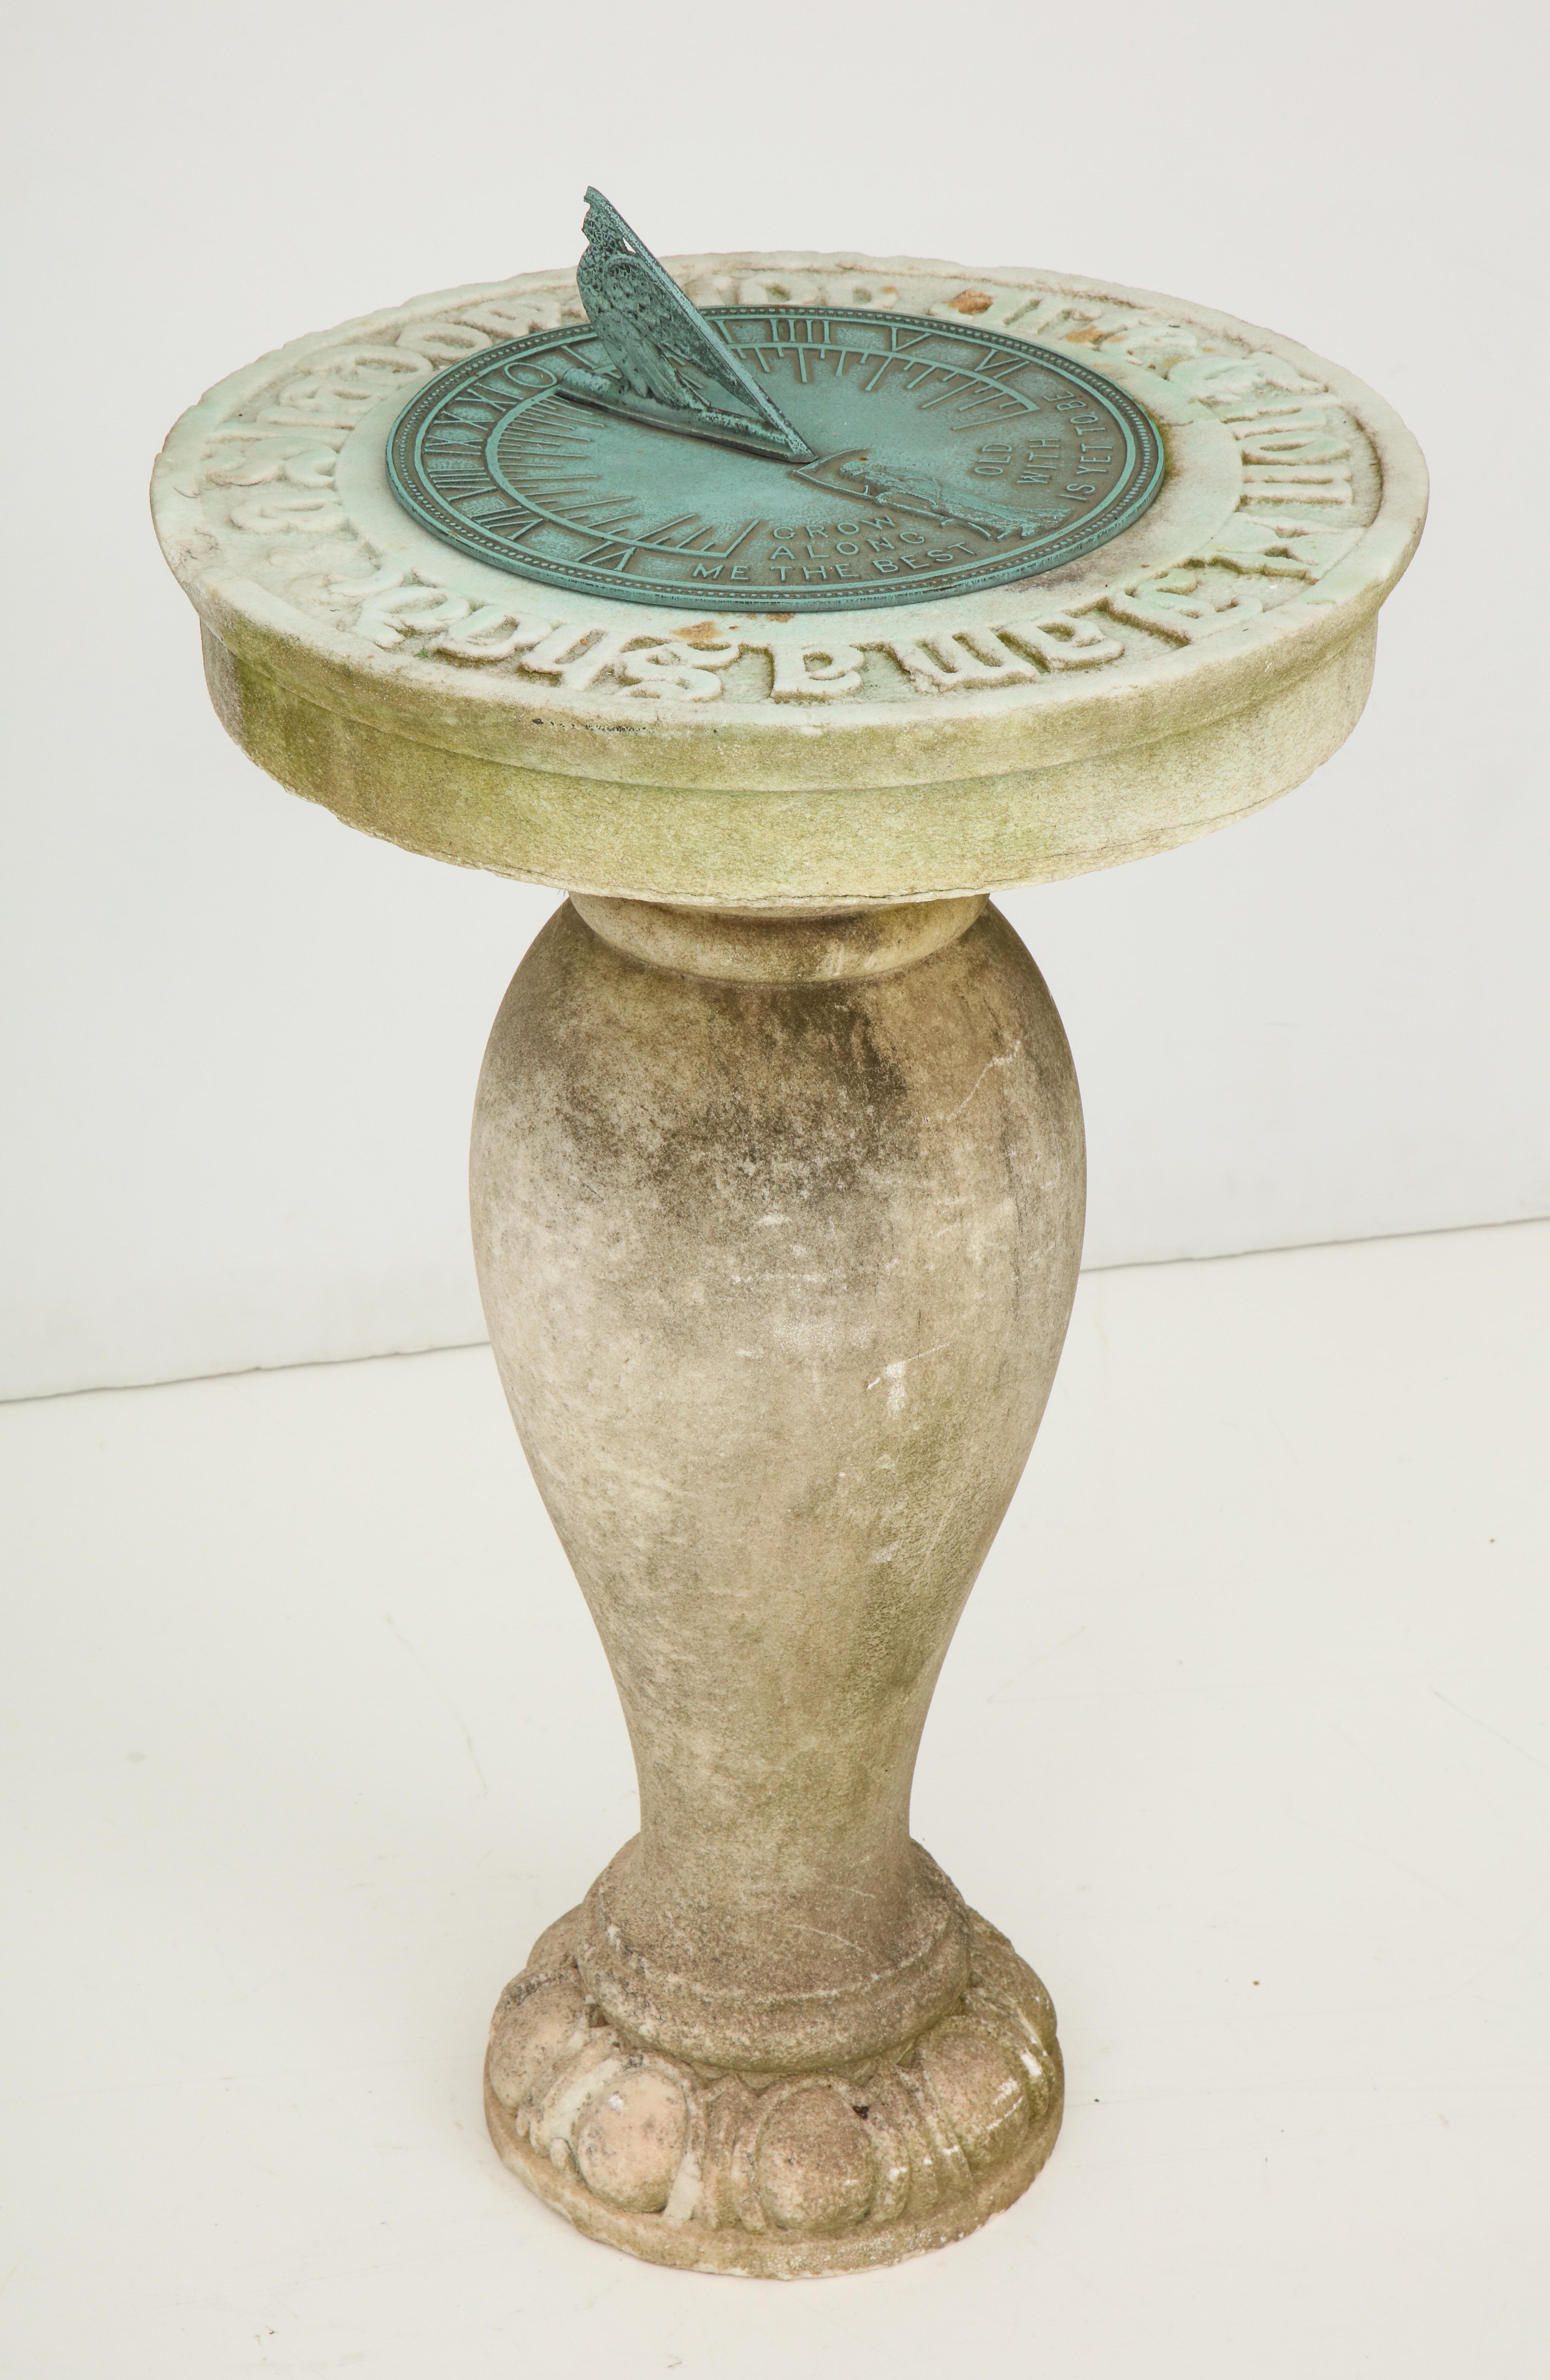 1880s carved marble and bronze sundial.